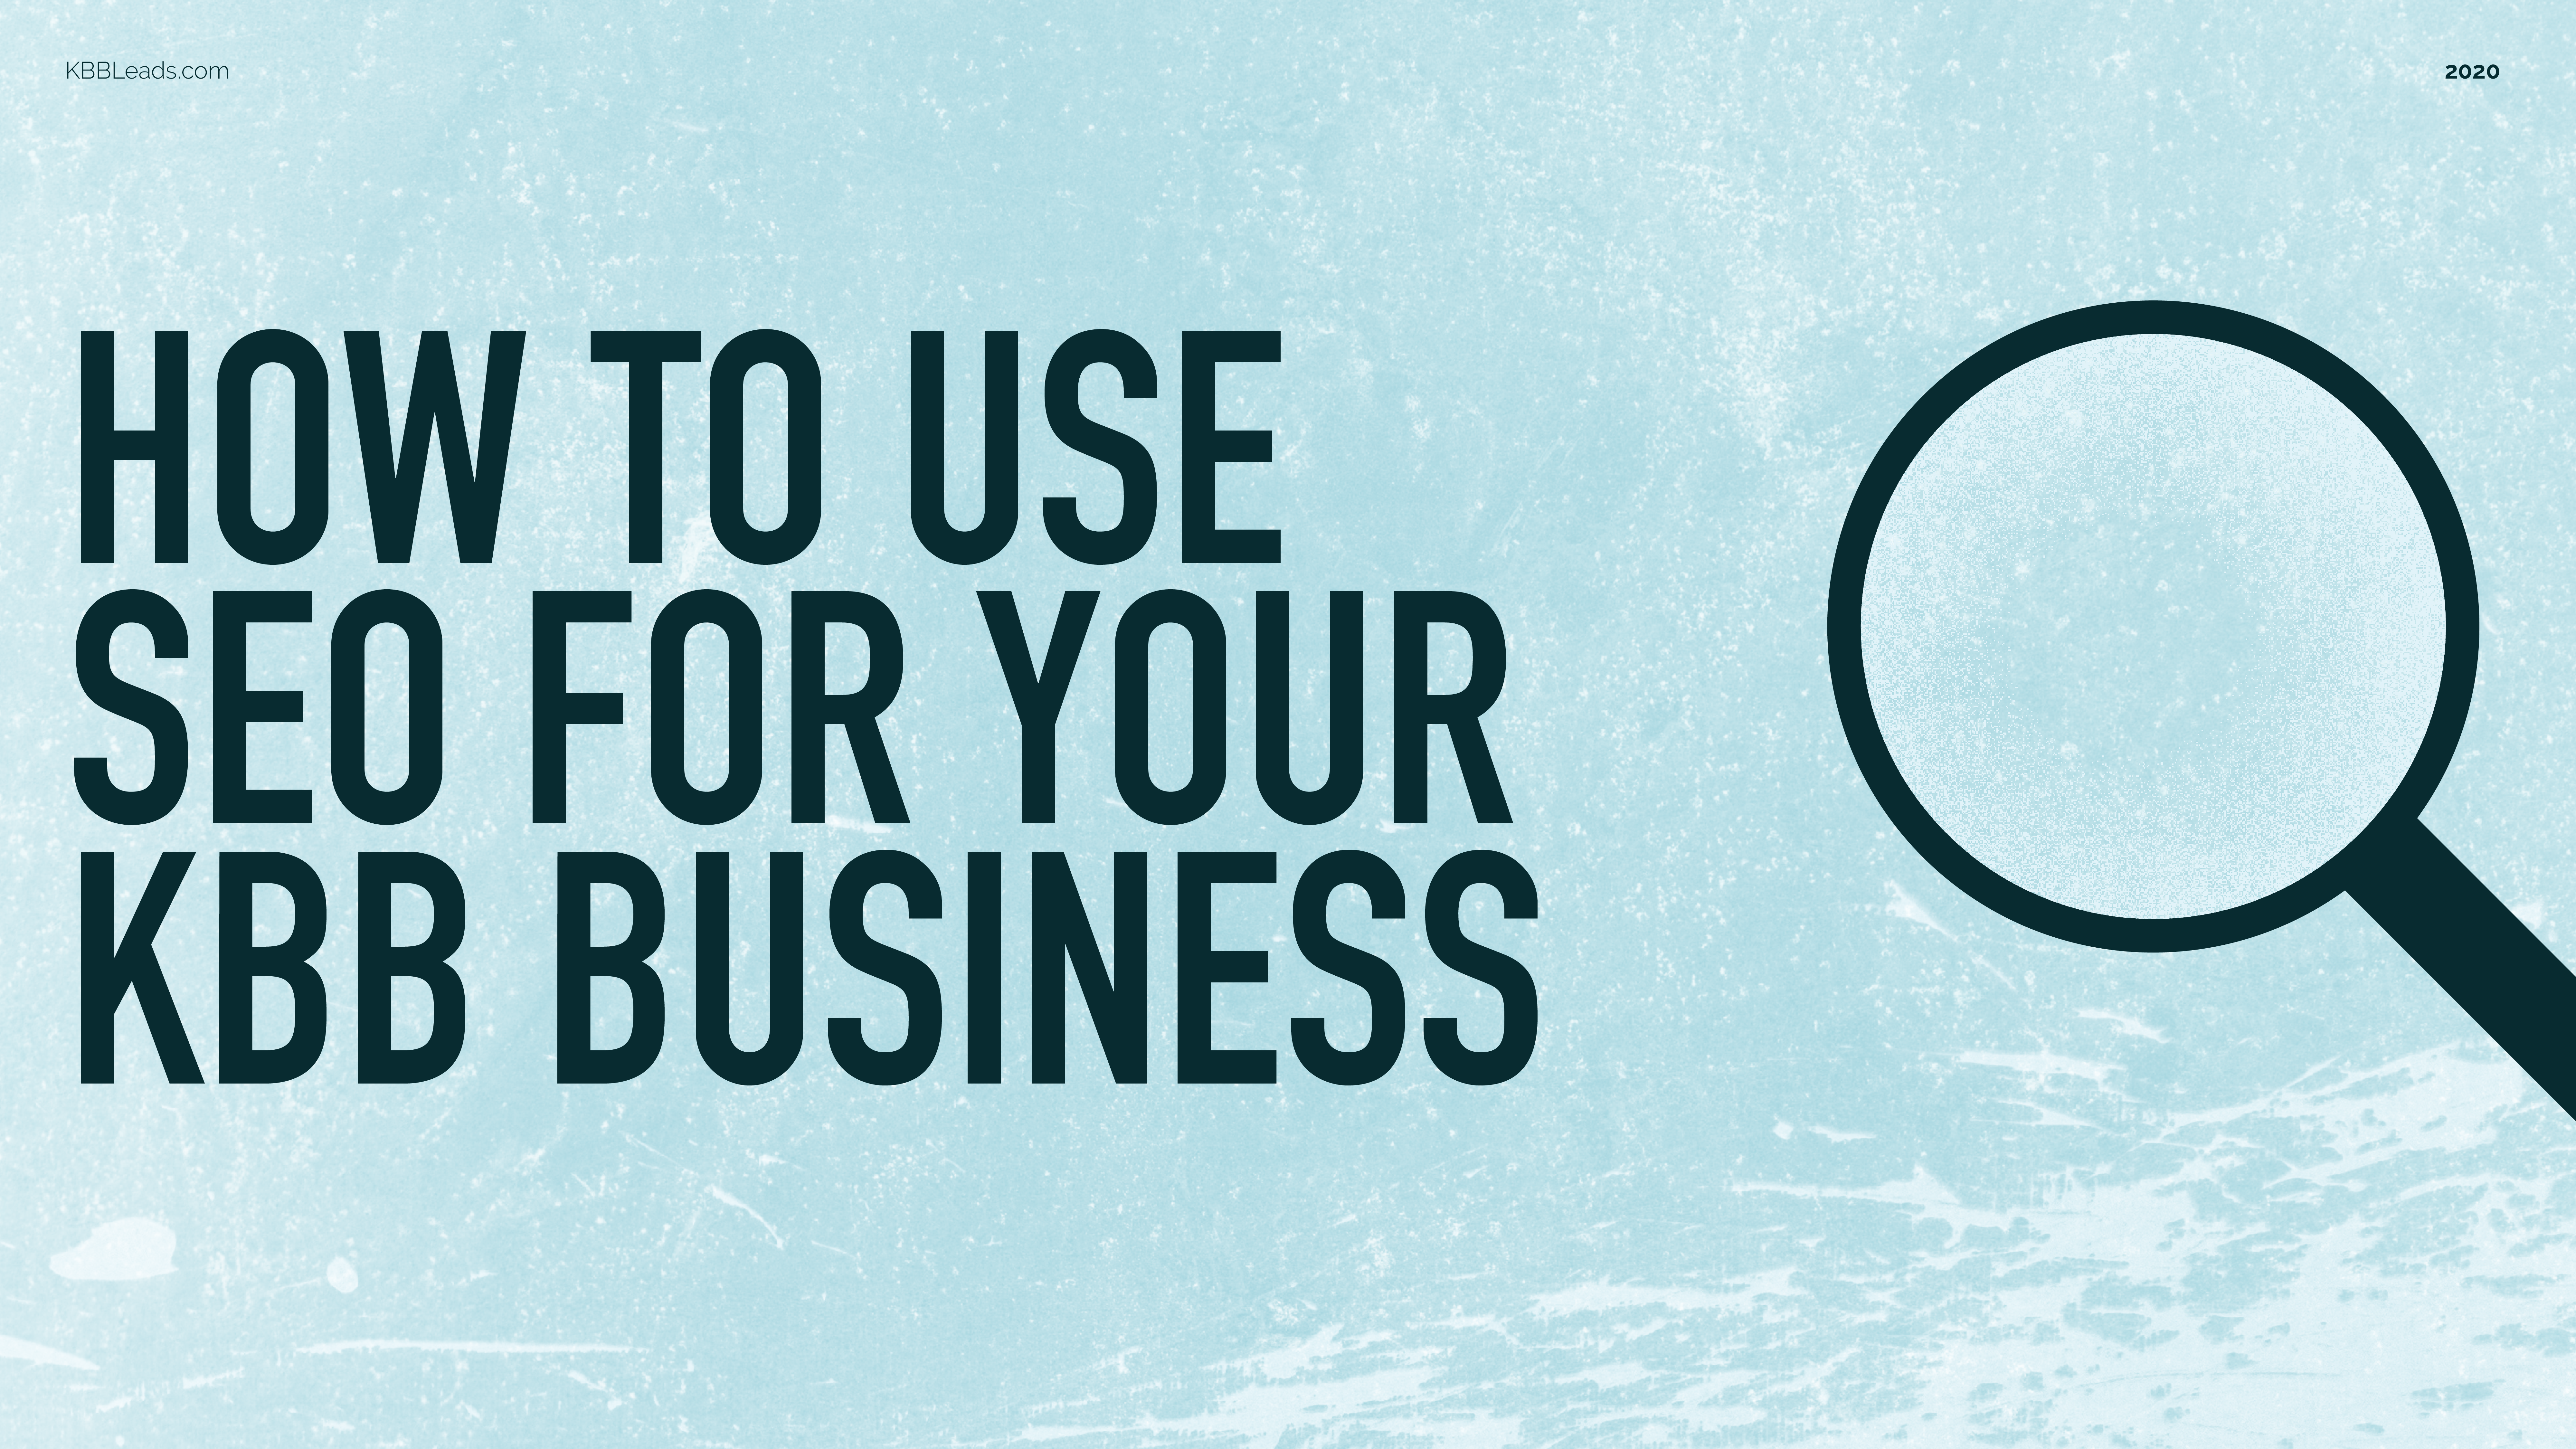 How To Use SEO For Your KBB Business